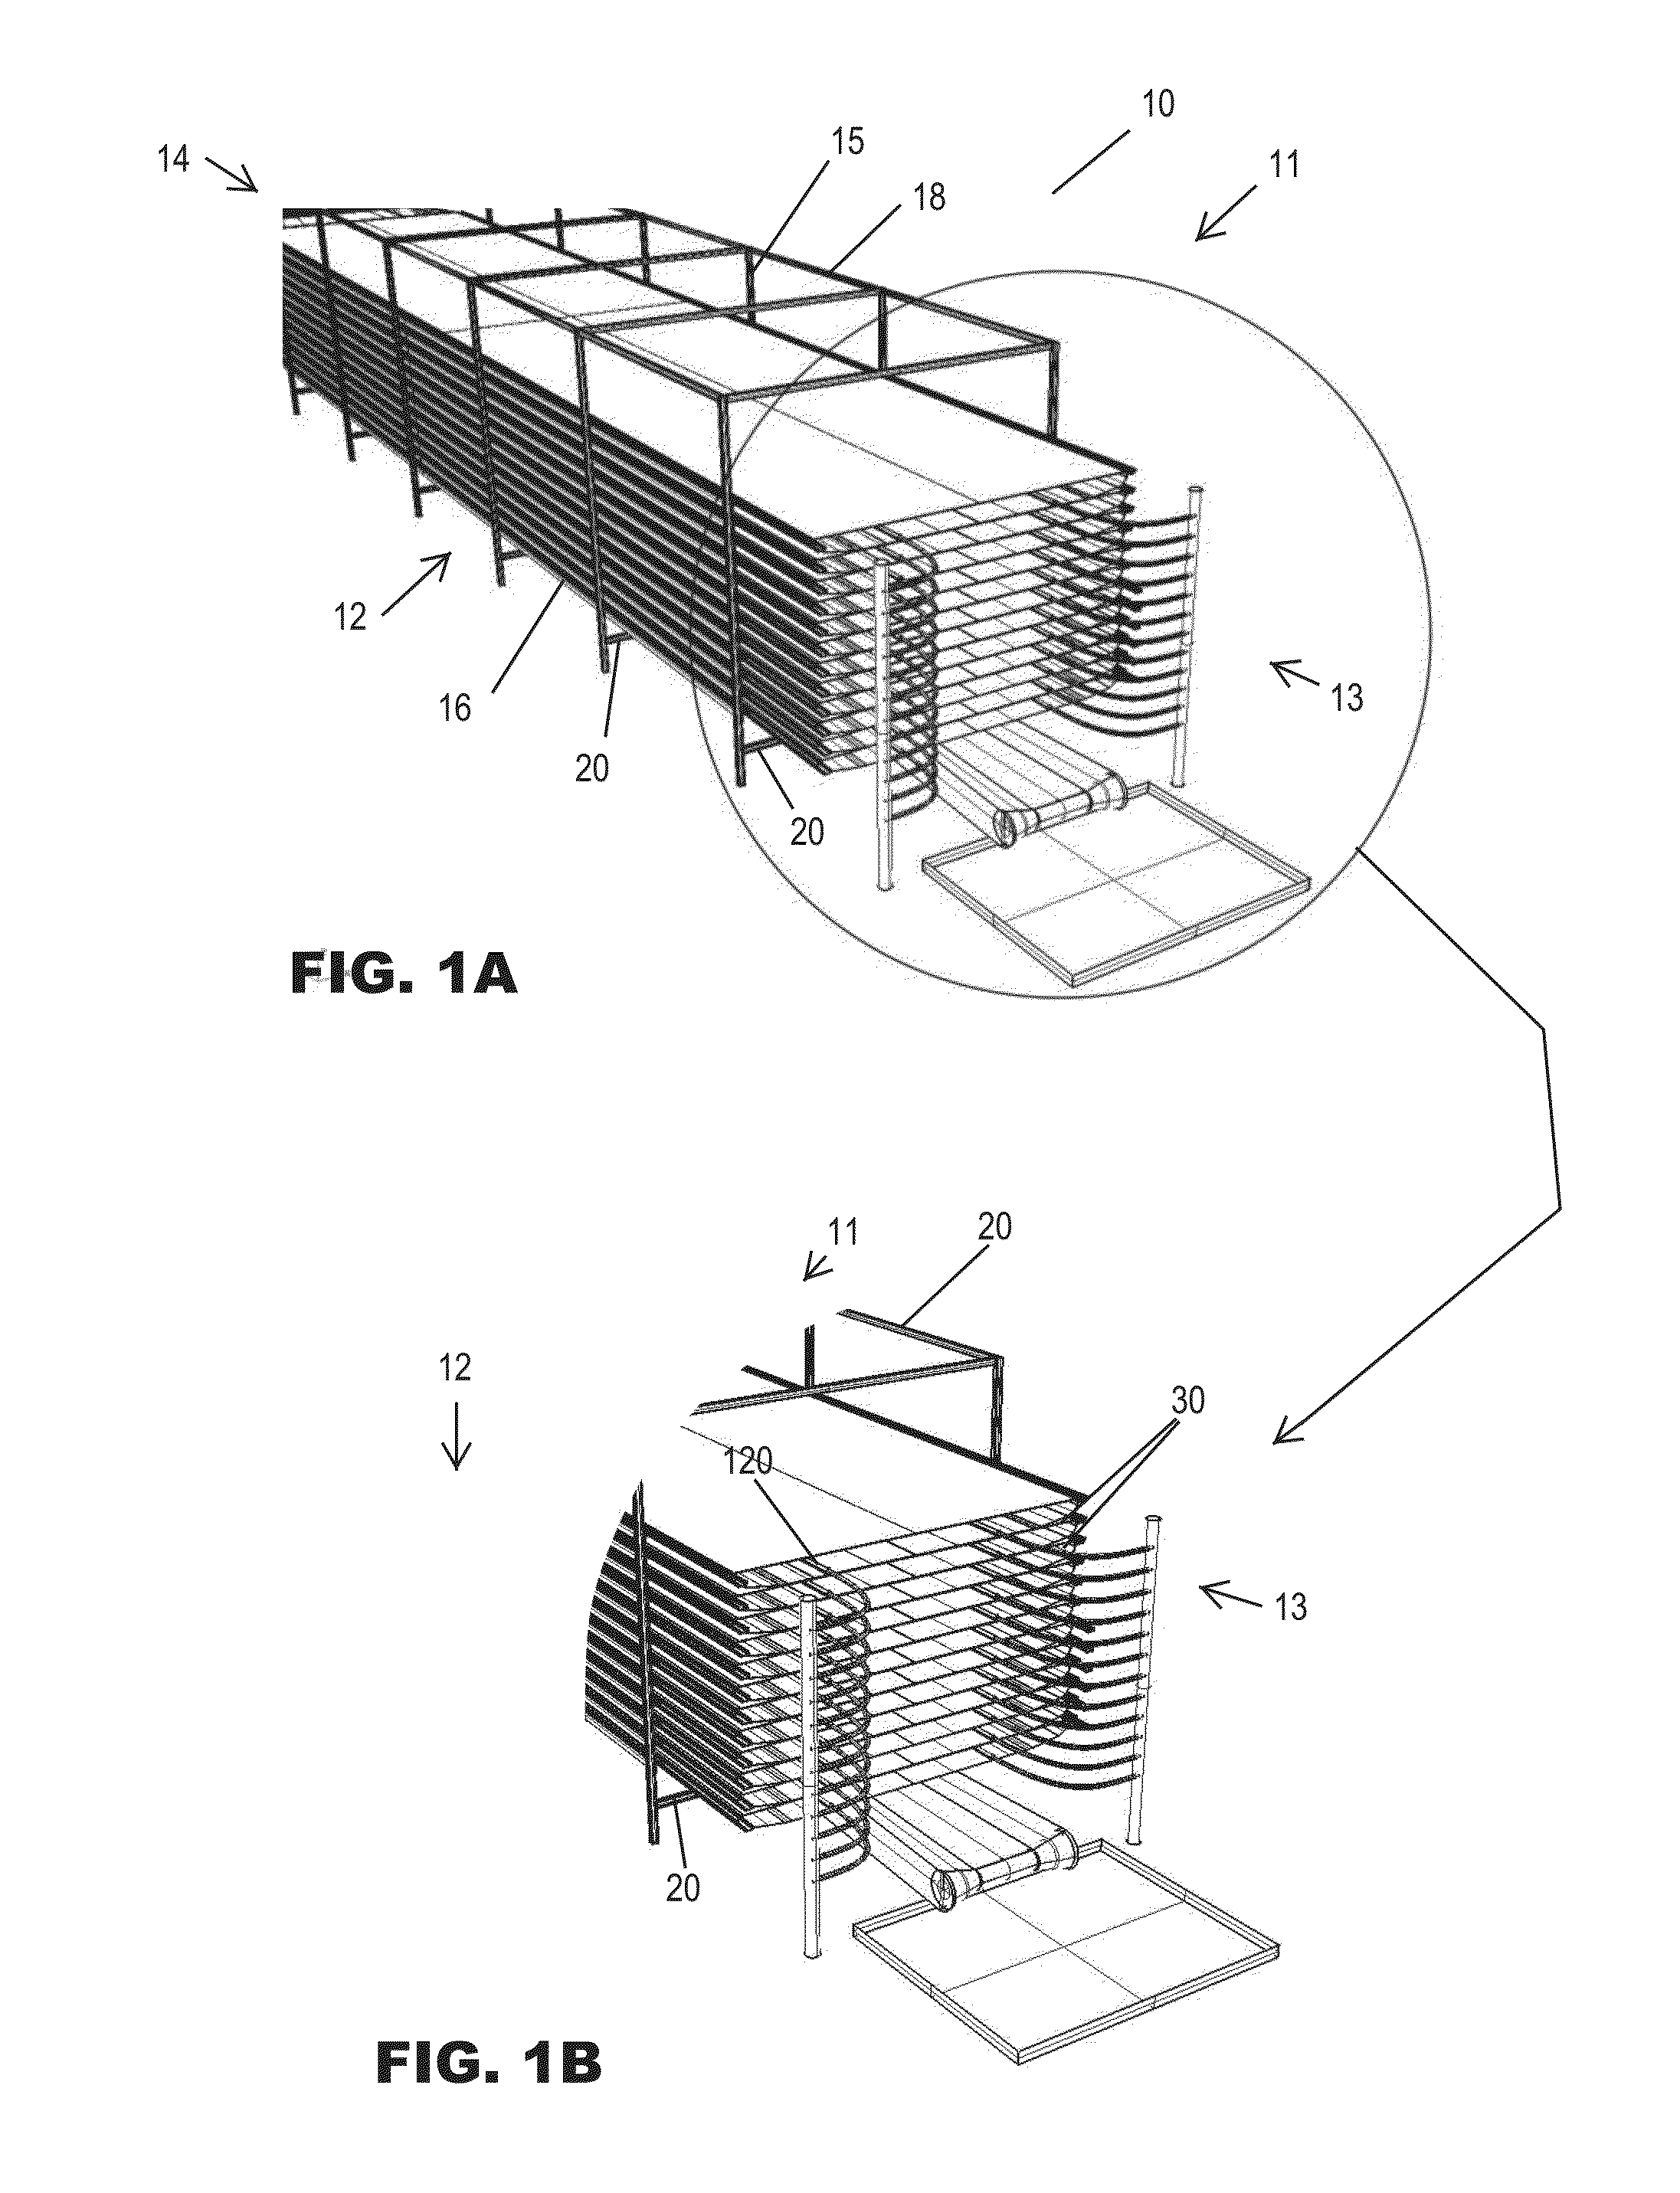 Bioreactors supported within a rack framework and methods of cultivating microorganisms therein